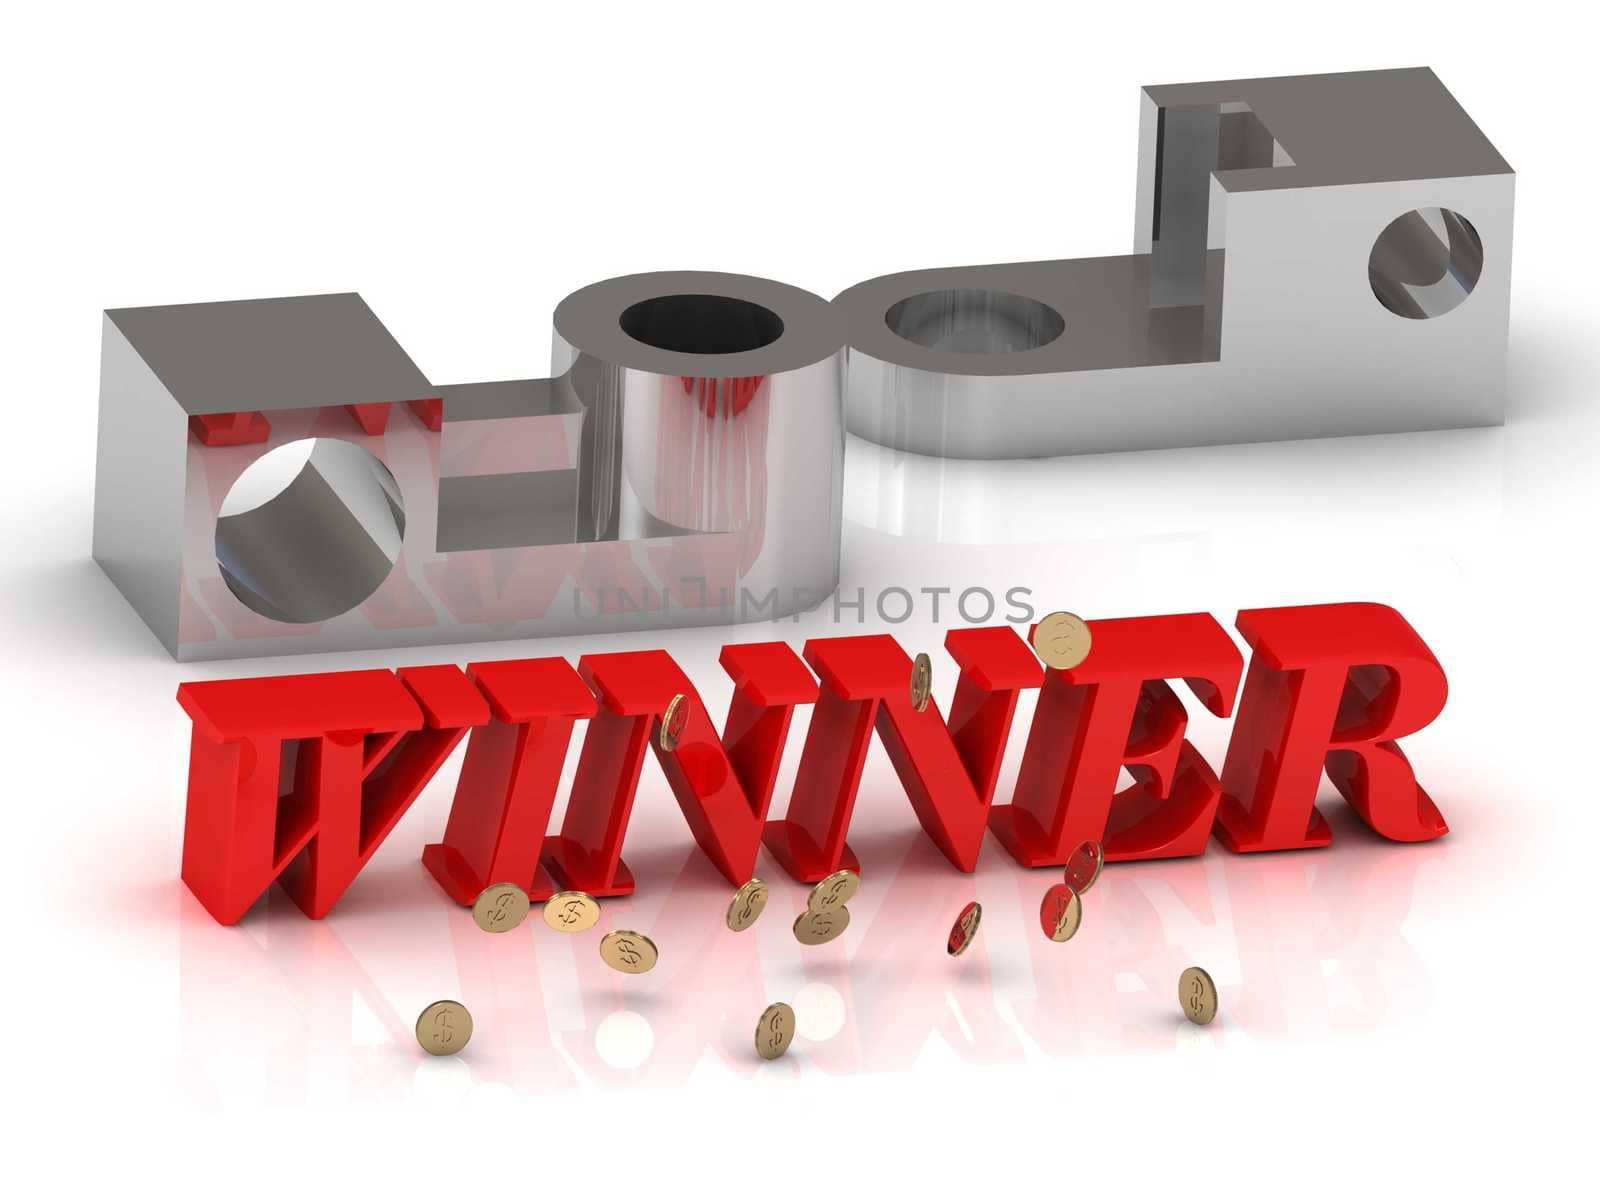 WINNER- inscription of red letters and silver details by GreenMost